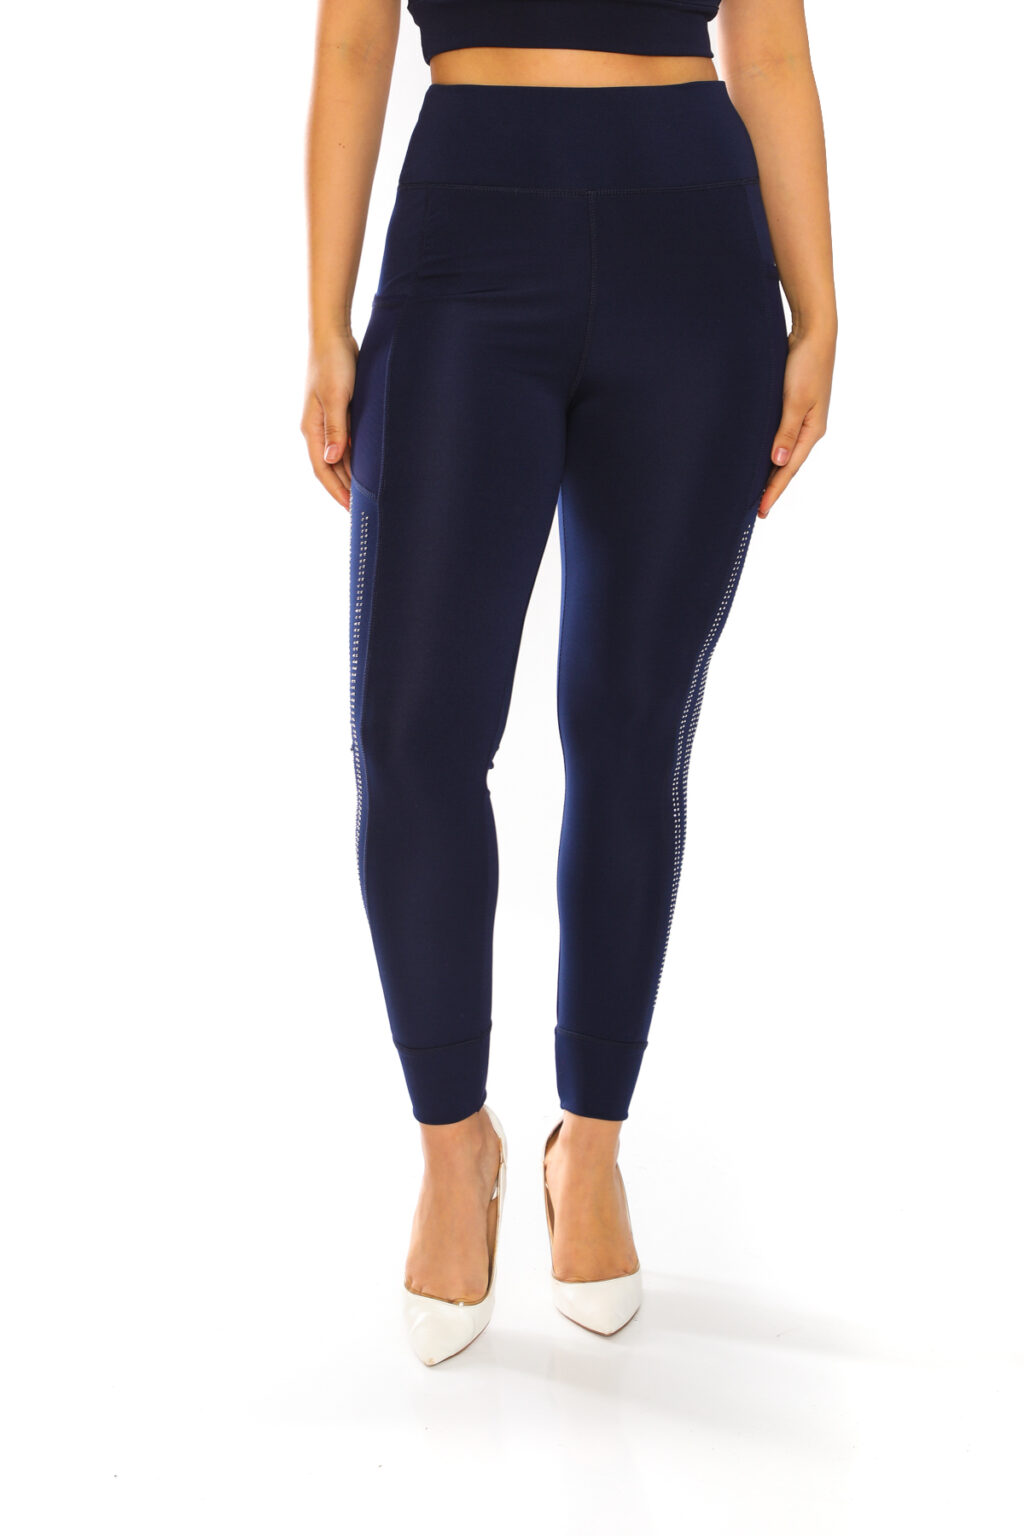 High Waist Navy Leggings with Side Pockets